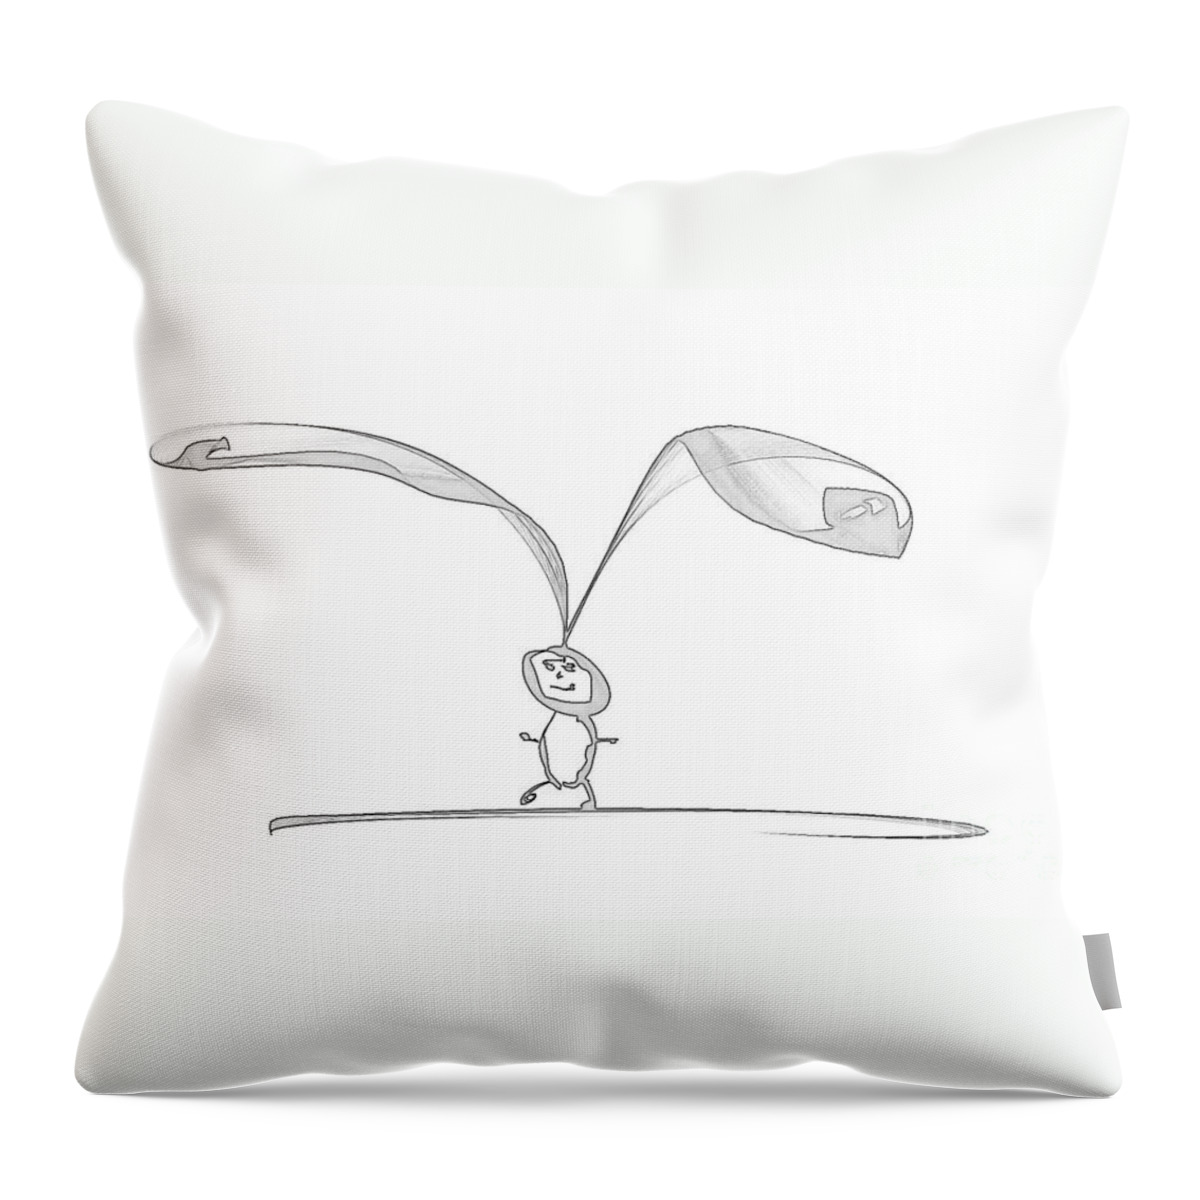 Silly Throw Pillow featuring the drawing Silly Rabbit Doodling by Renee Trenholm